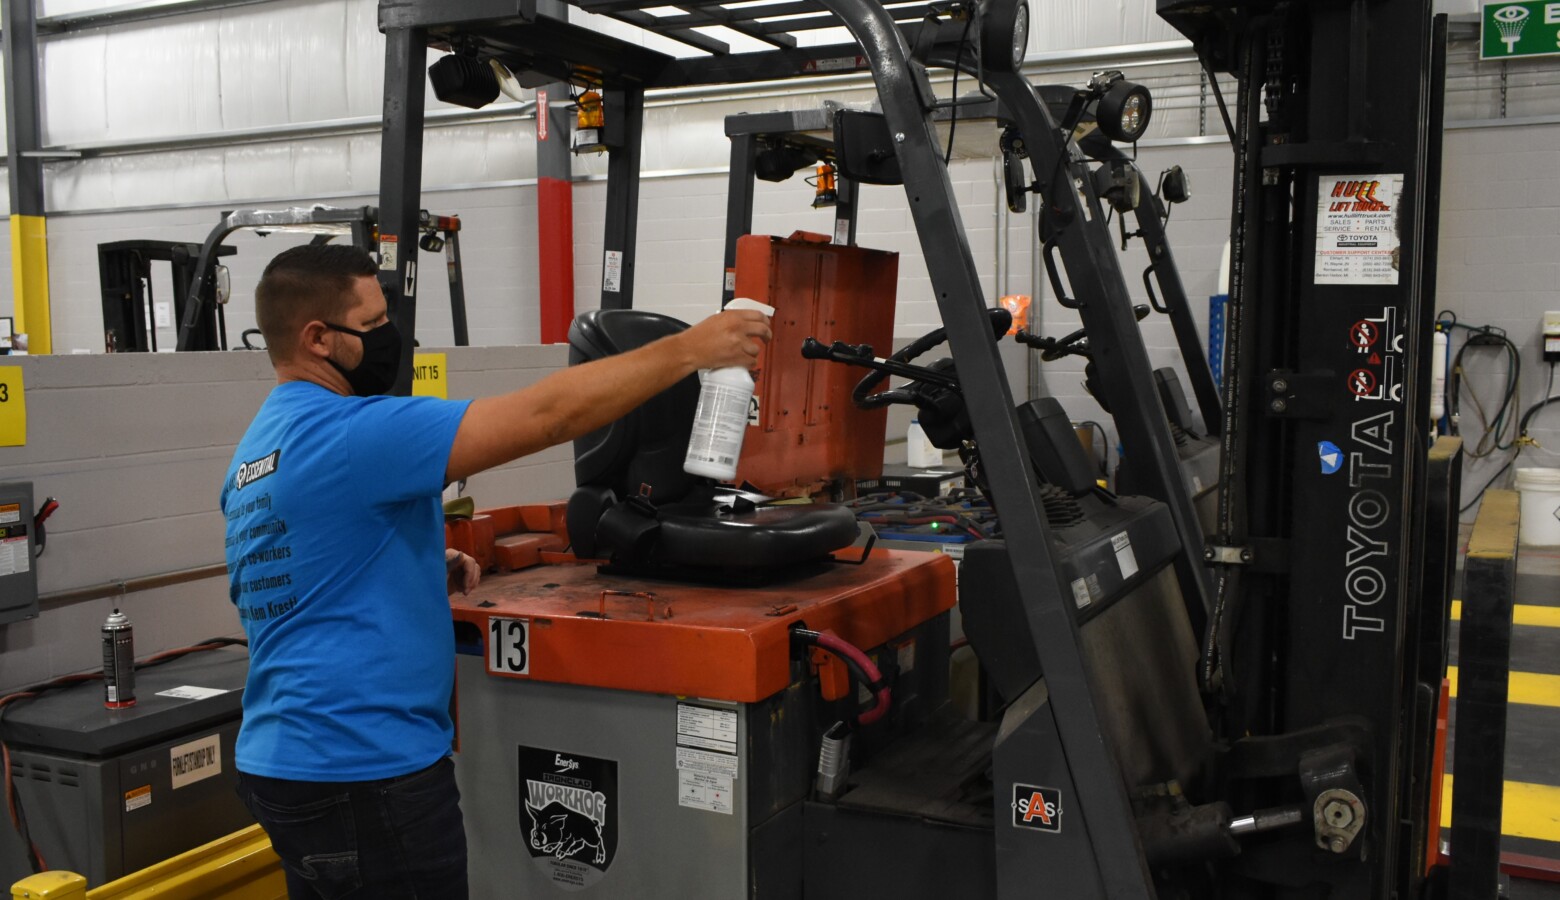 A worker sprays down a forklift in an Elkhart factory in accordance with the company's COVID-19 safety standards. (Justin Hicks/IPB News)